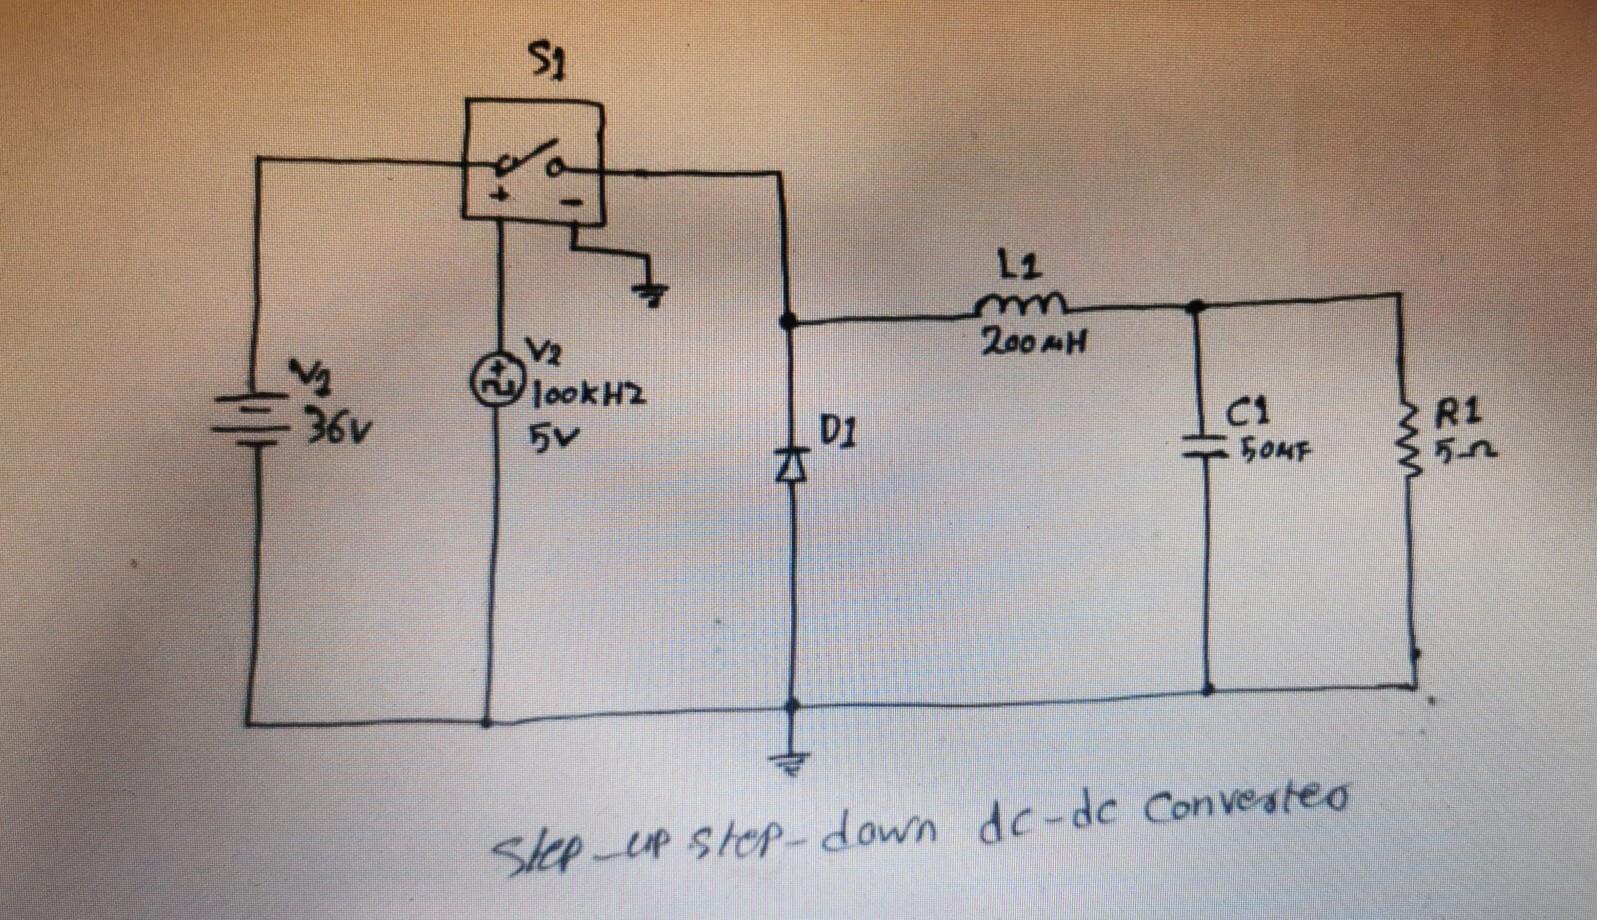 Solved Step-up step-down dc-dc converter Aim To study the